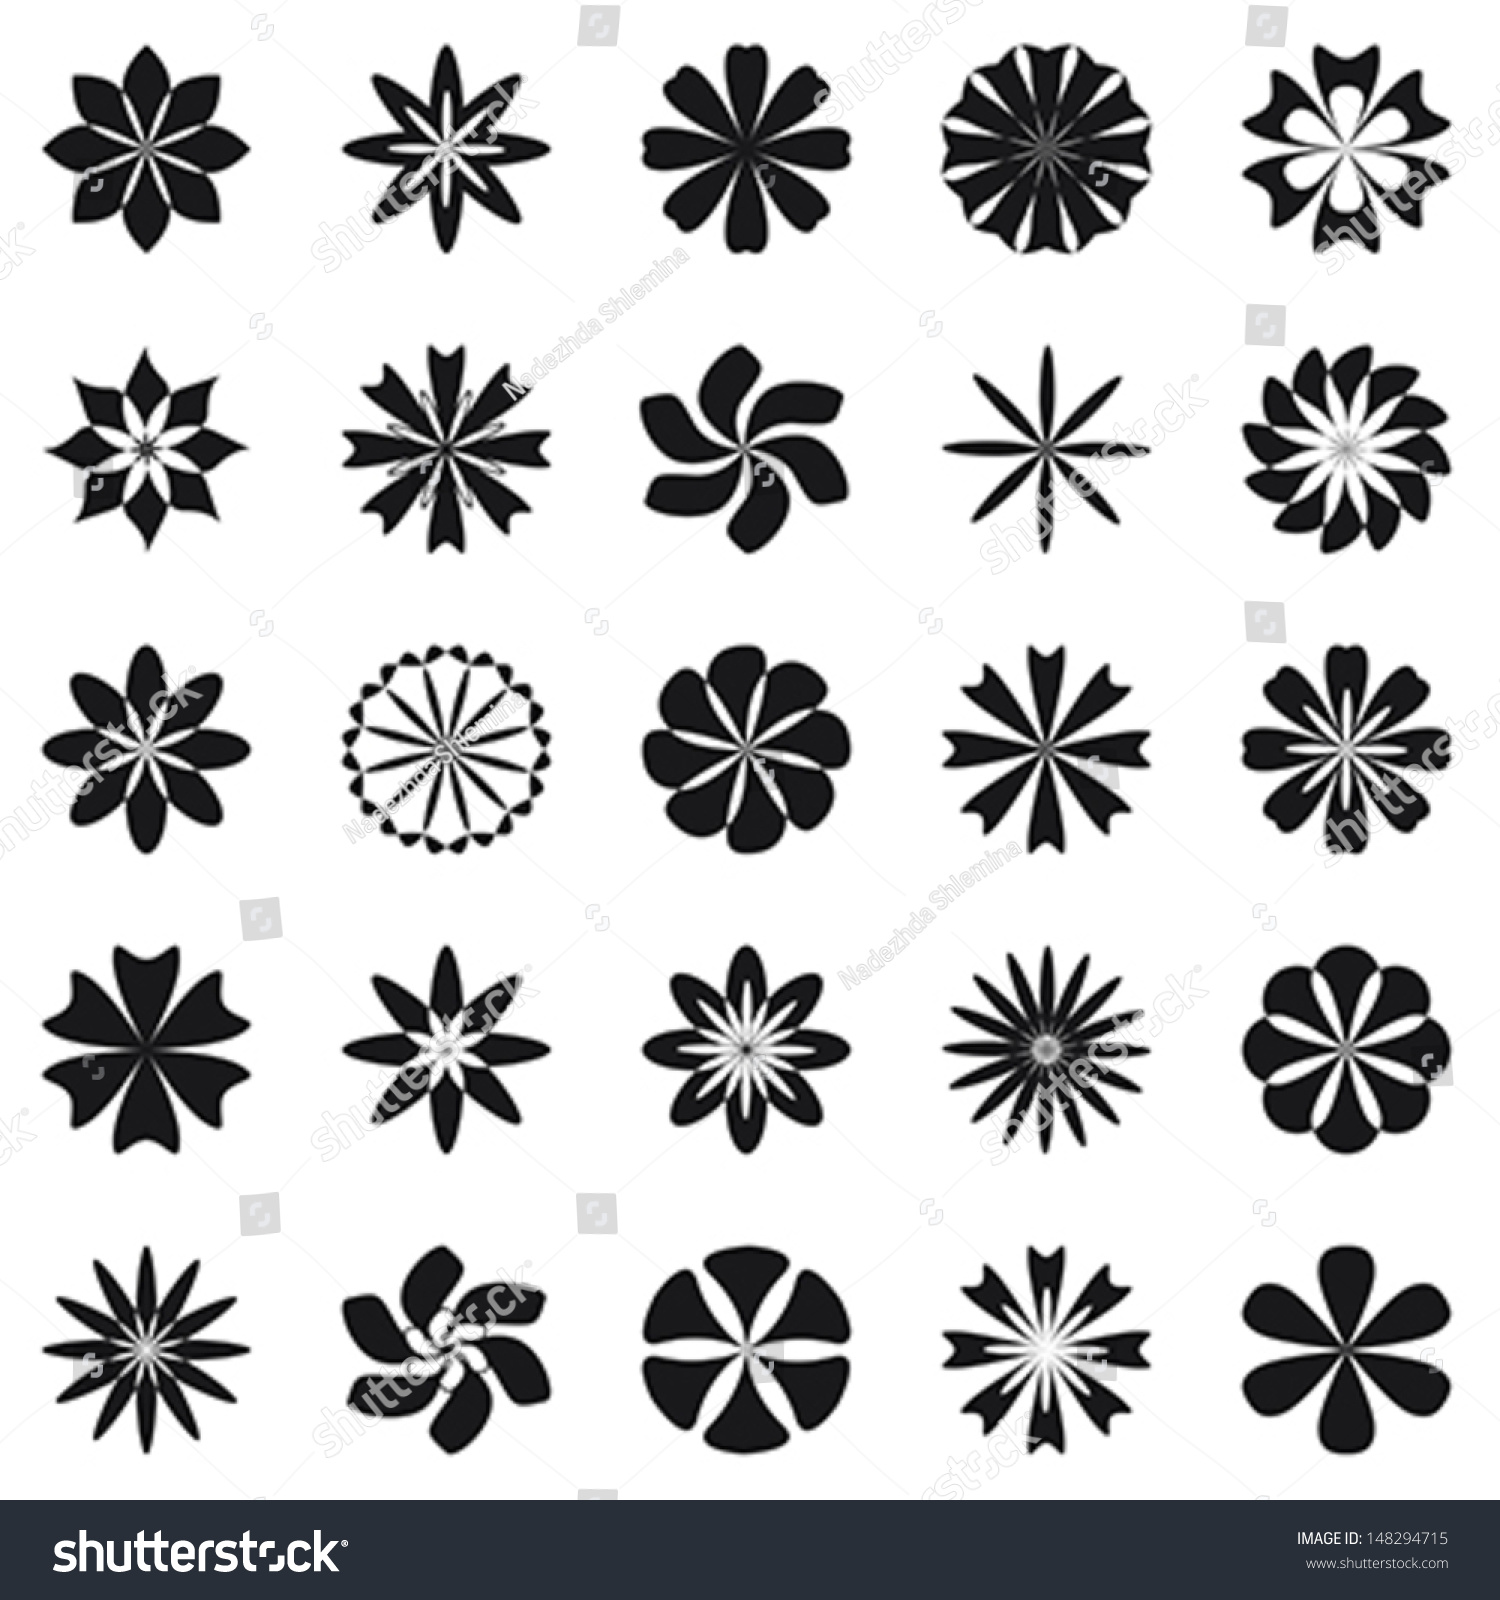 Flower Symbol Set Can Used Art Stock Vector (Royalty Free) 148294715 ...